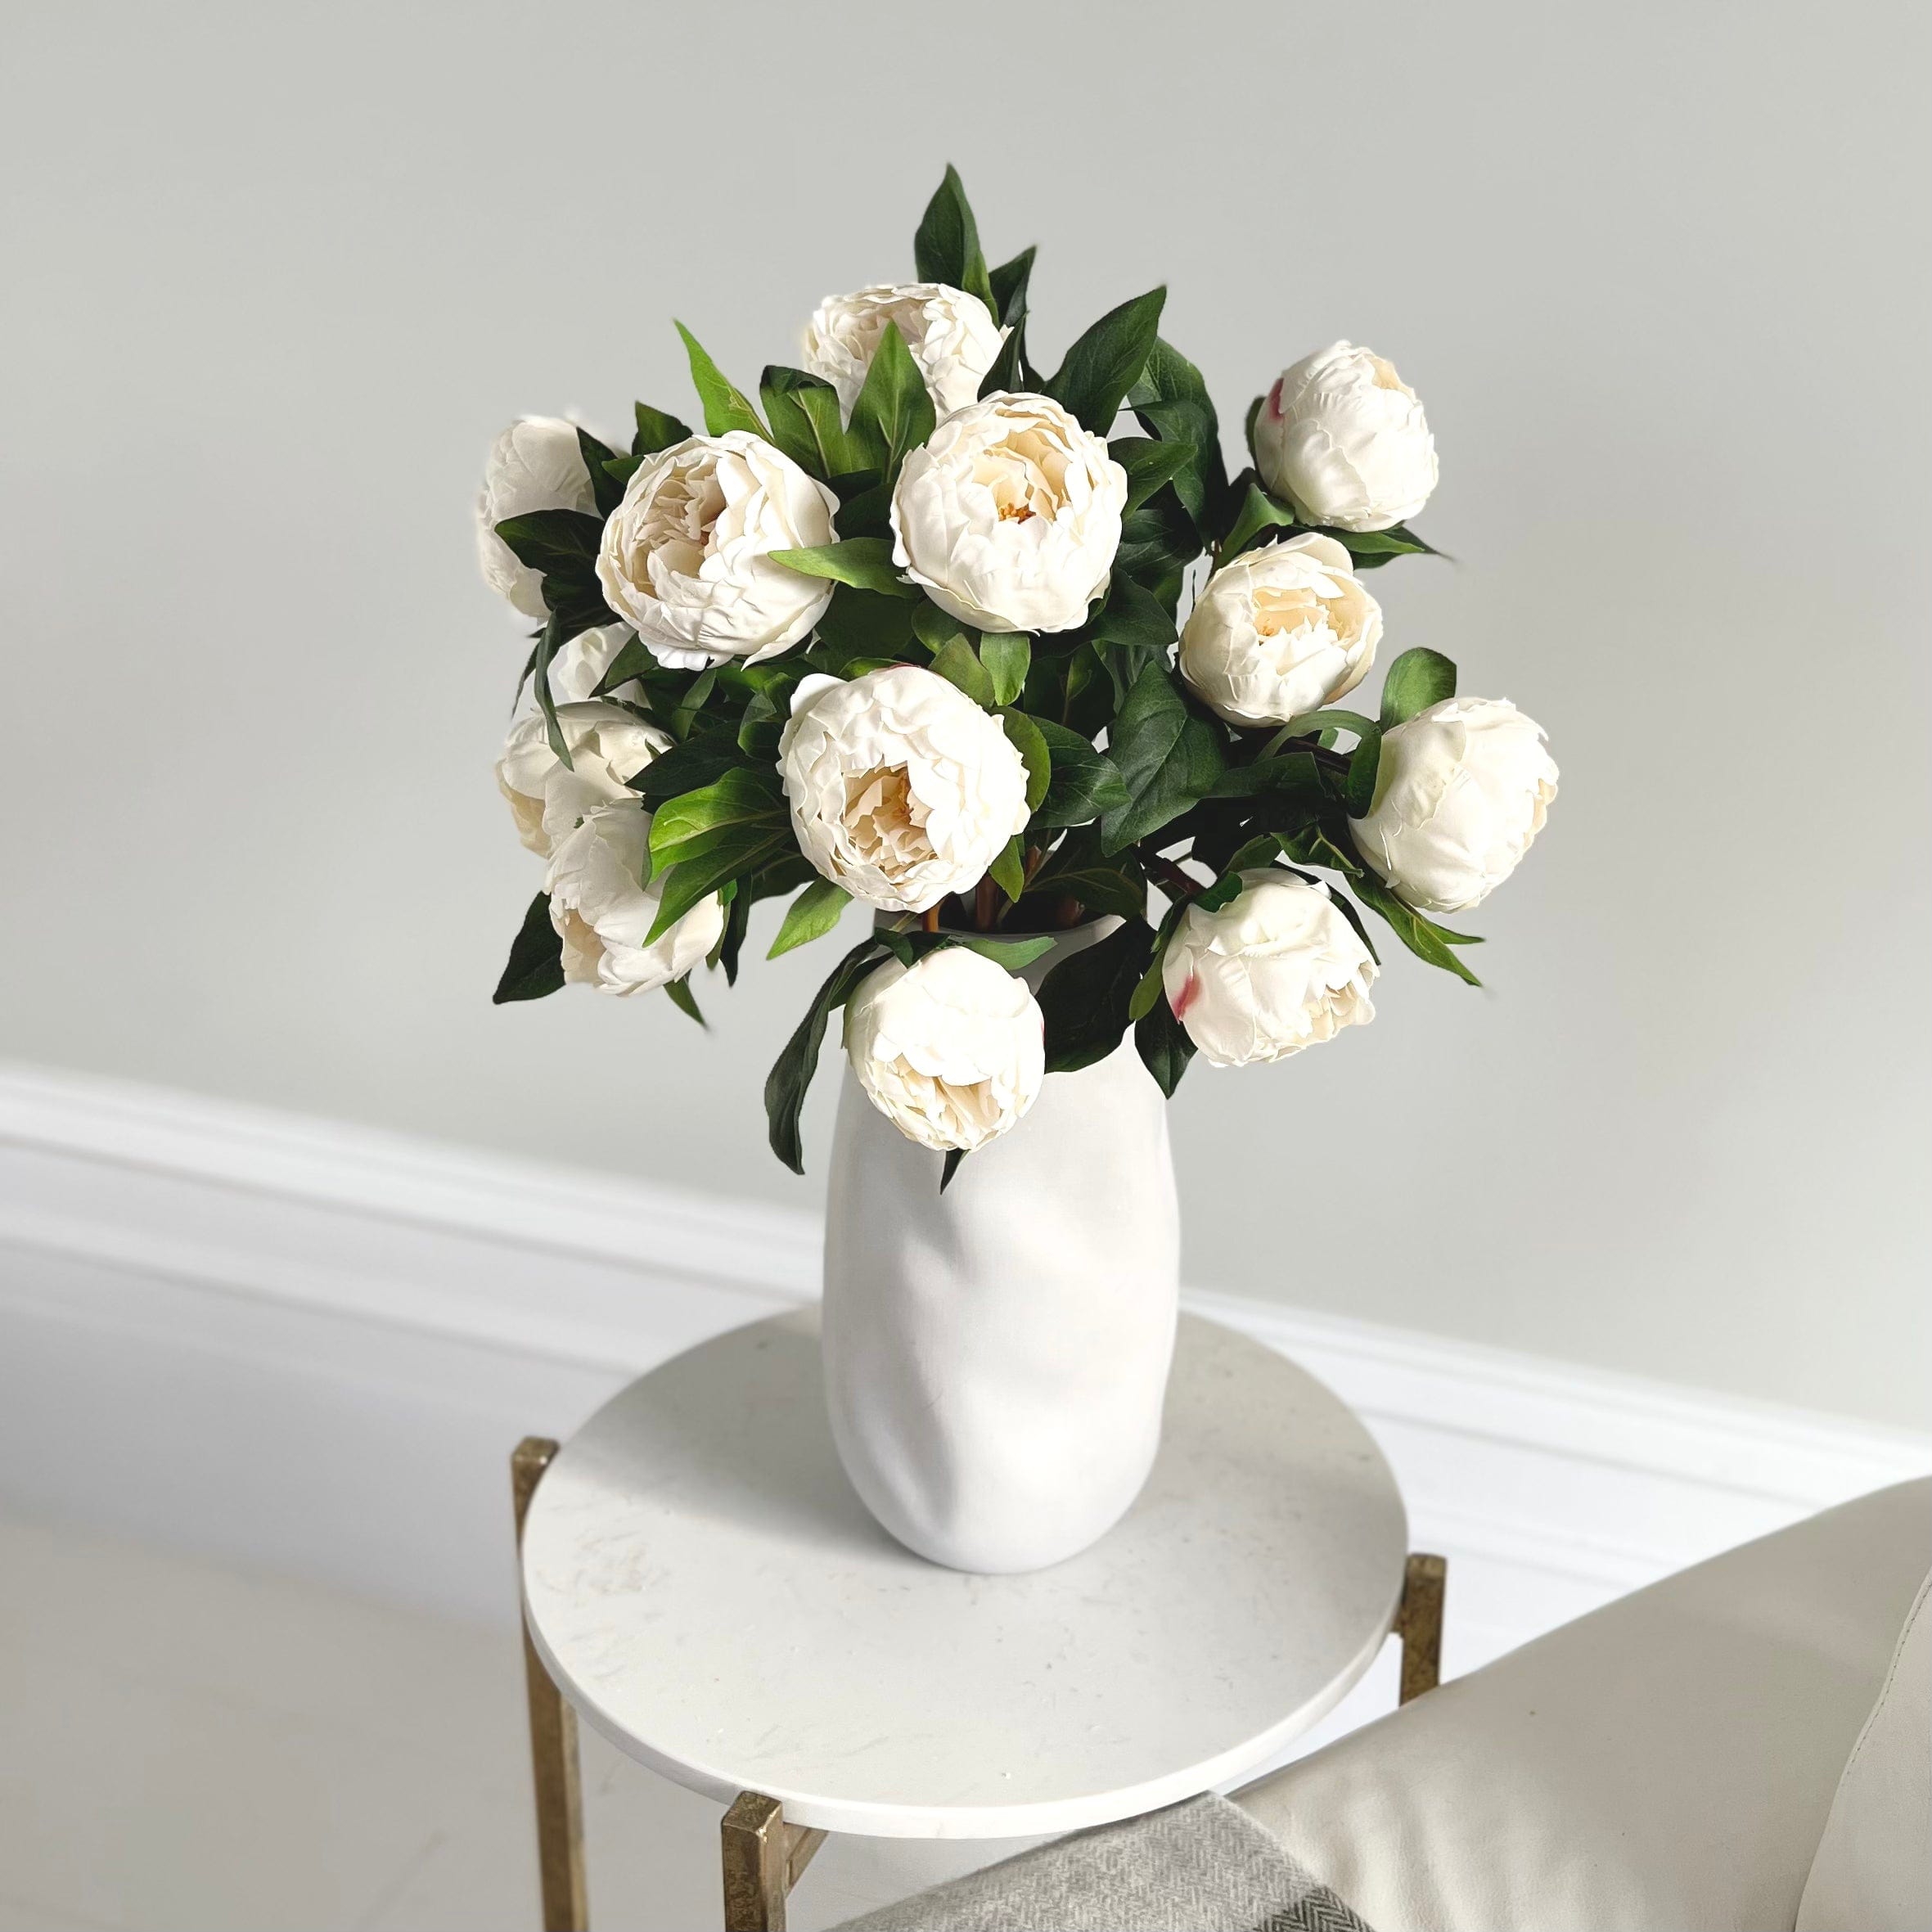 Luxury Lifelike Realistic Artificial Fabric Silk Blooms with Foliage Buy Online from The Faux Flower Company | 7 stems of White Real Touch Peony ABZ9148WH styled in Naunton Vase ABP525B